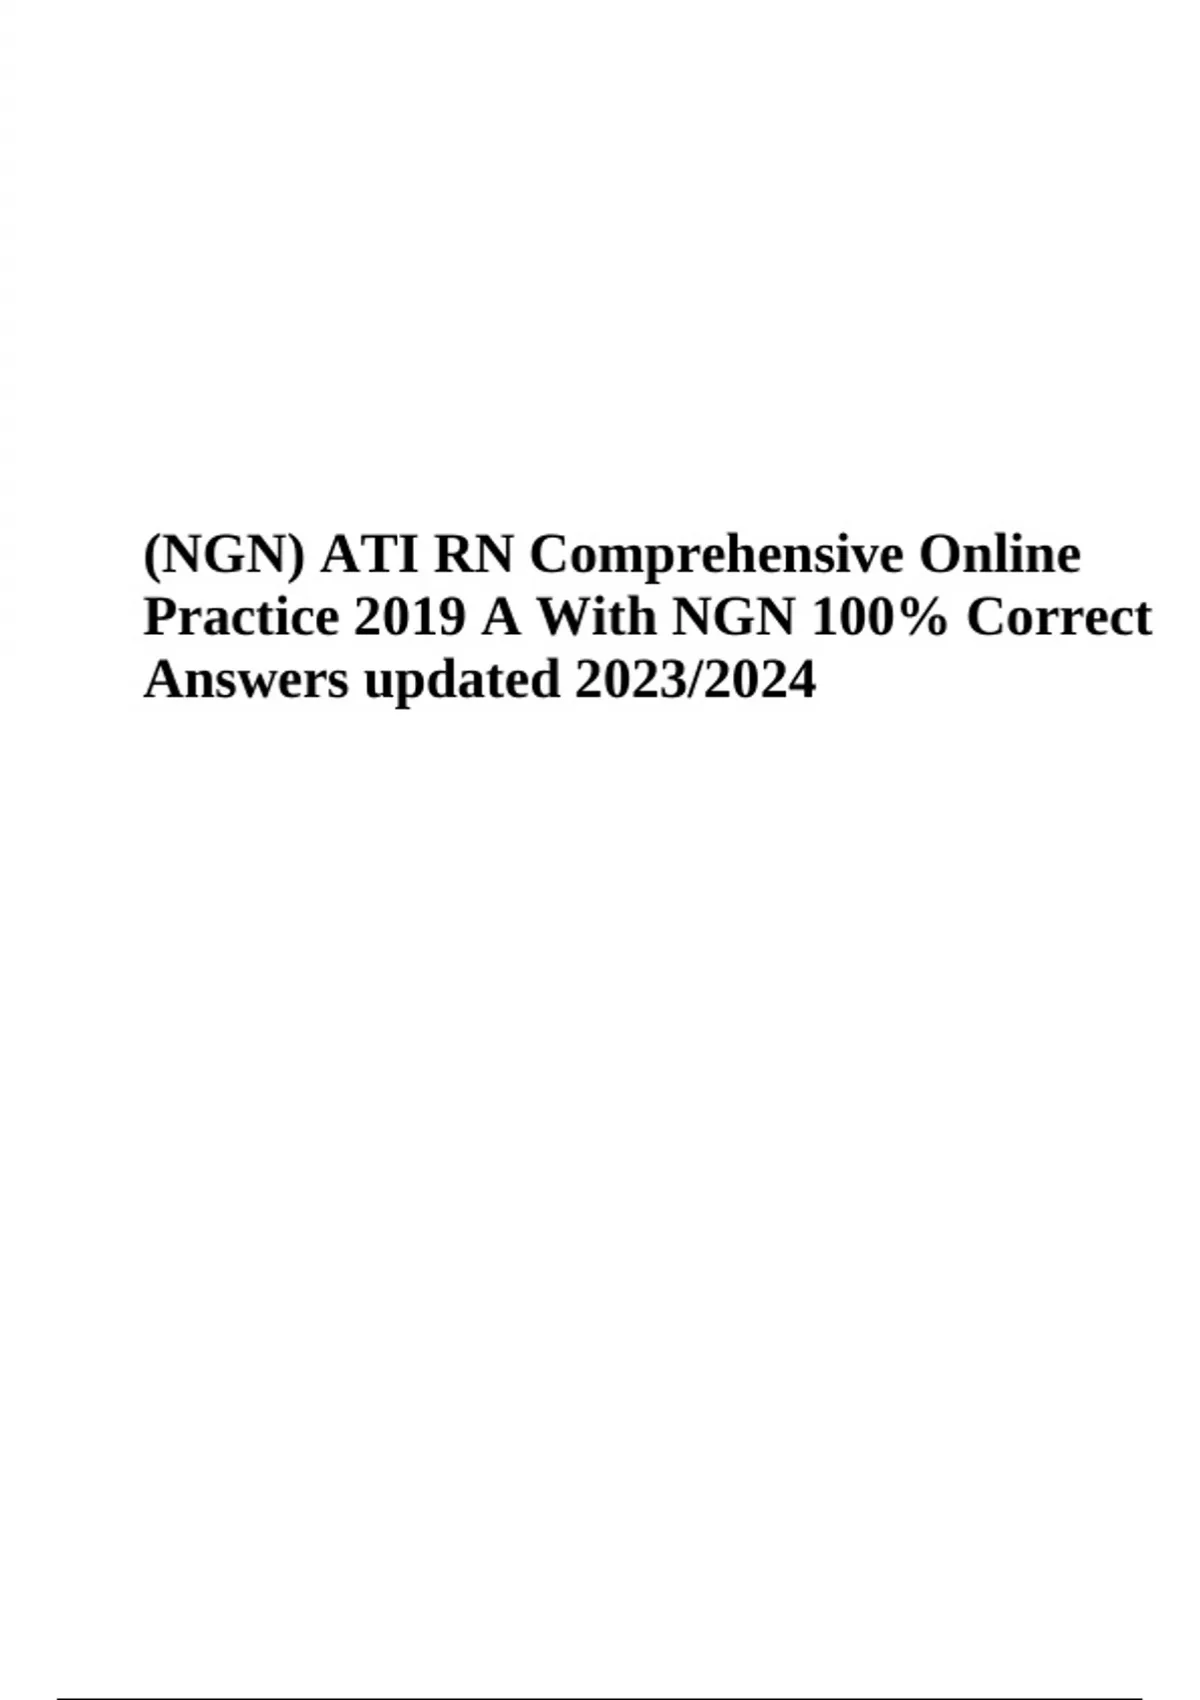 NGN ATI RN Comprehensive Online Practice 2019 With NGN Questions